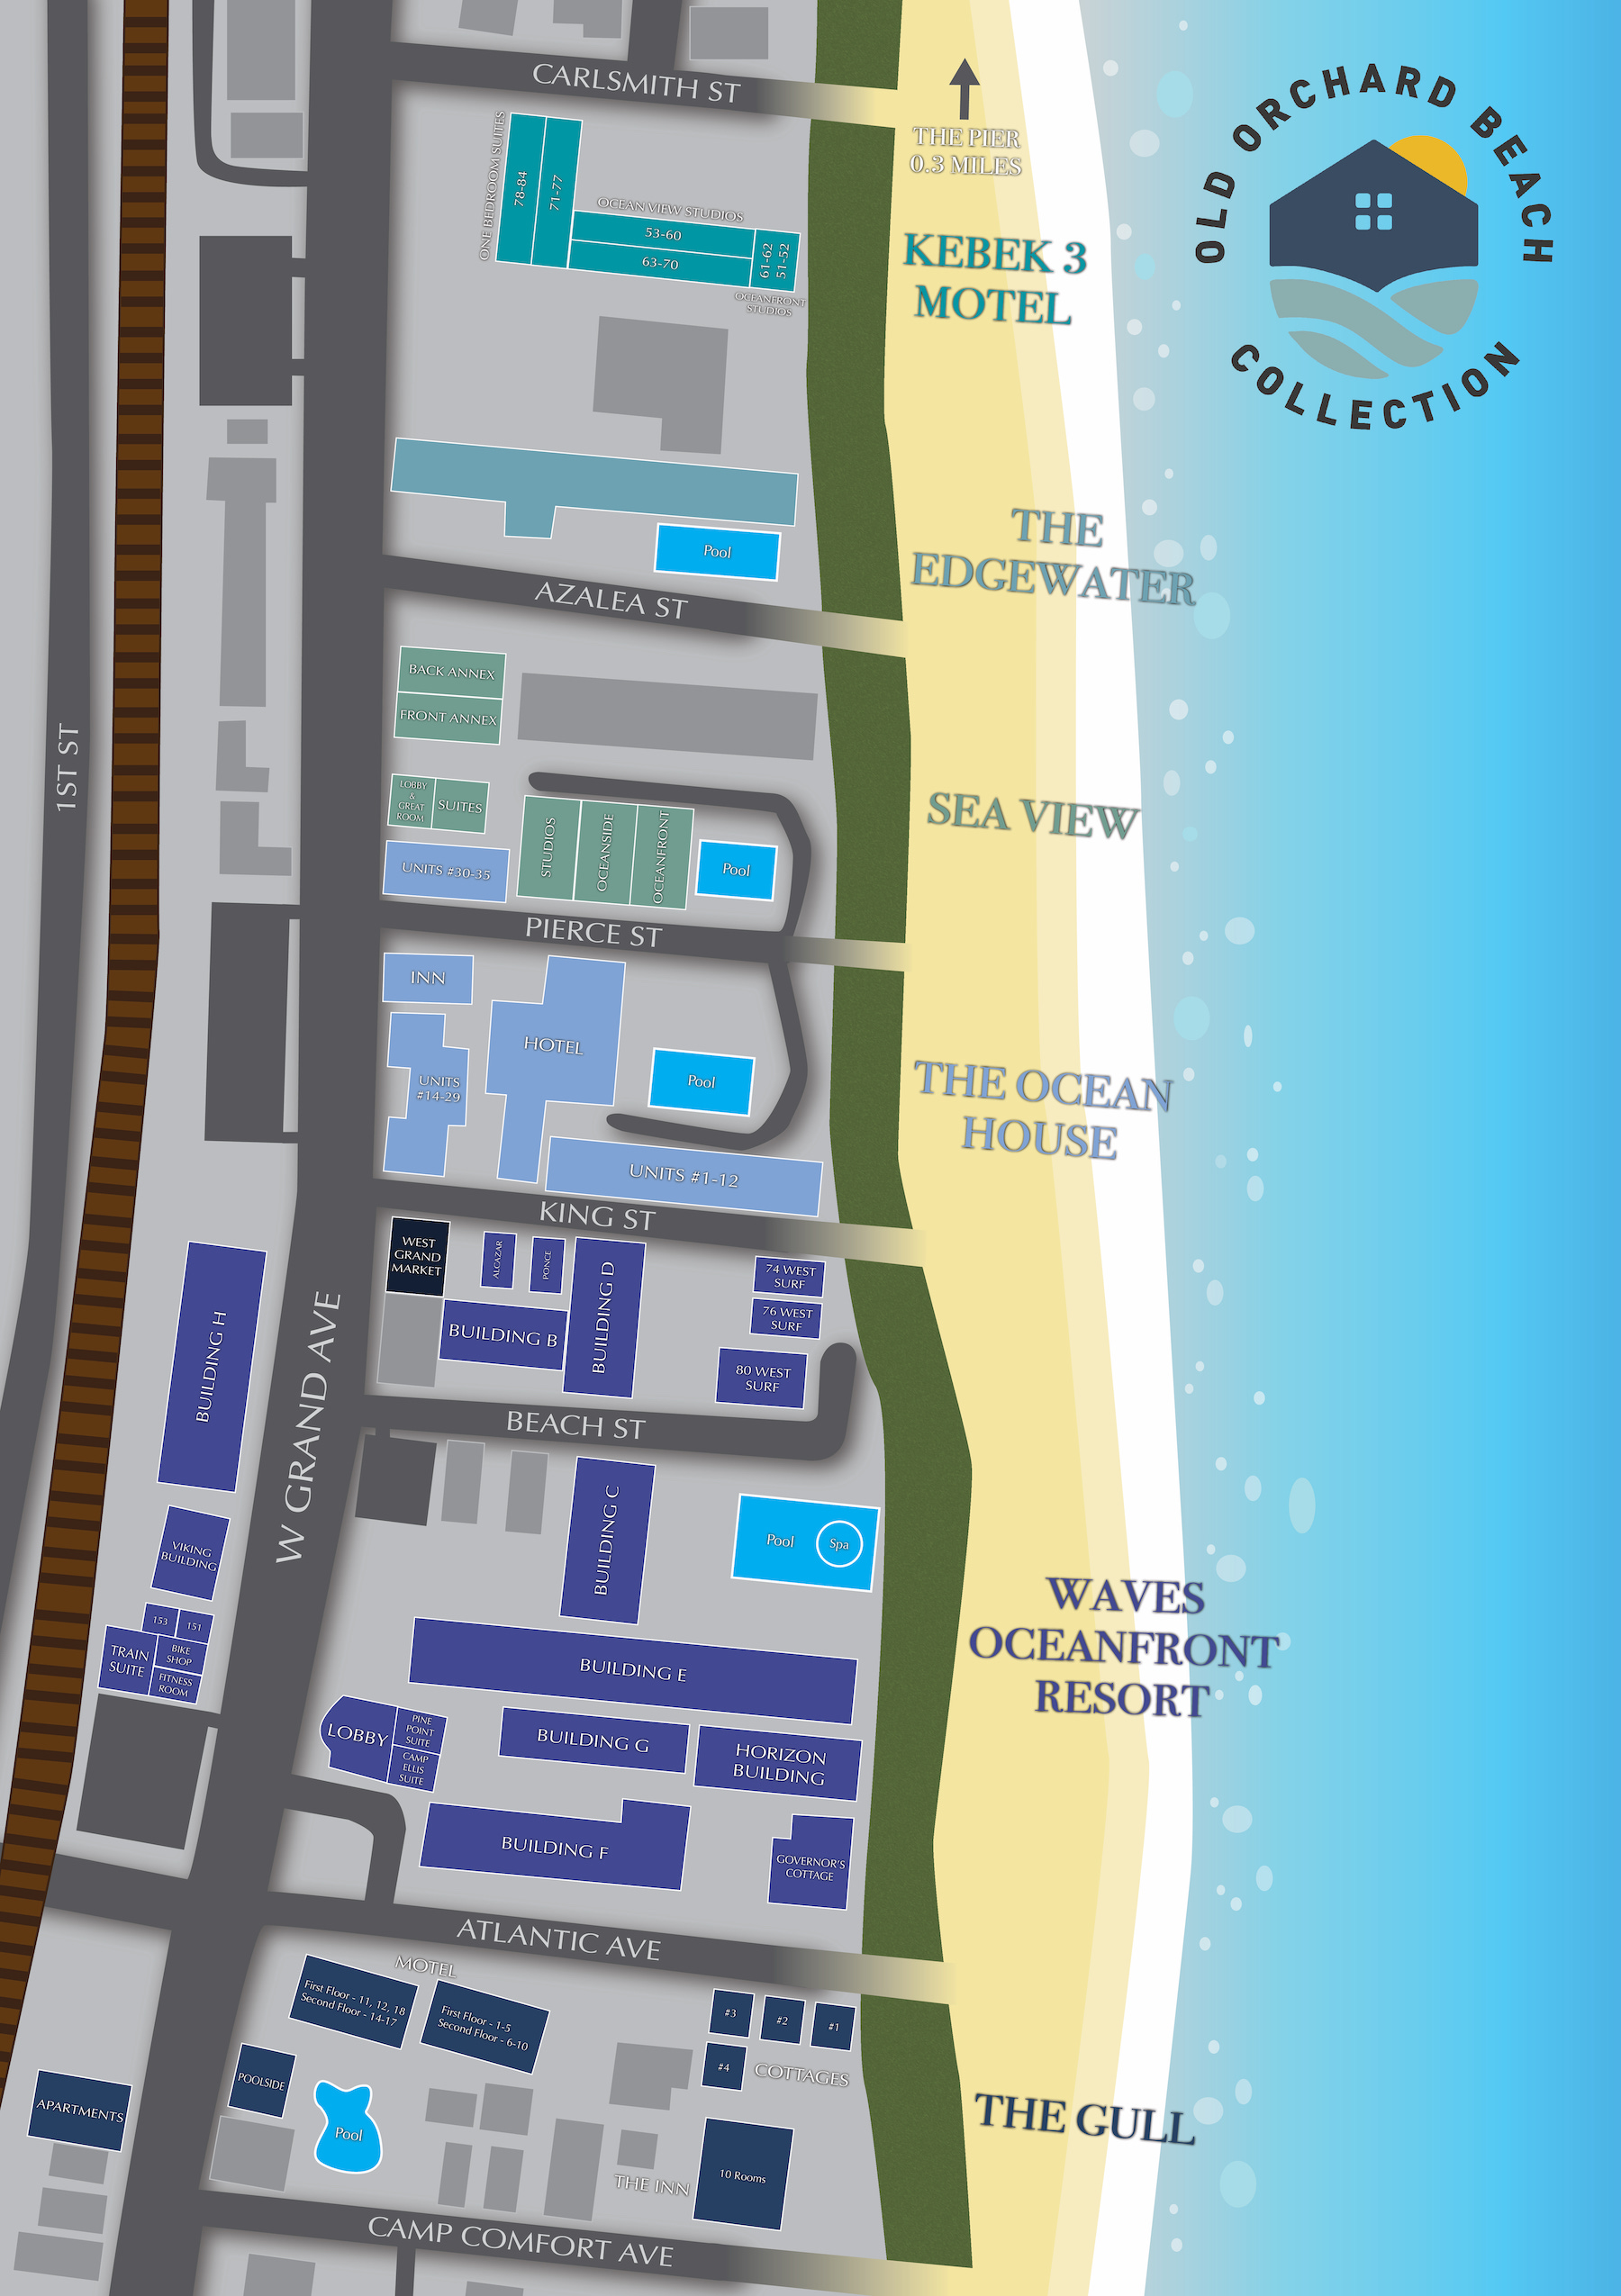 old orchard beach hotels collection map